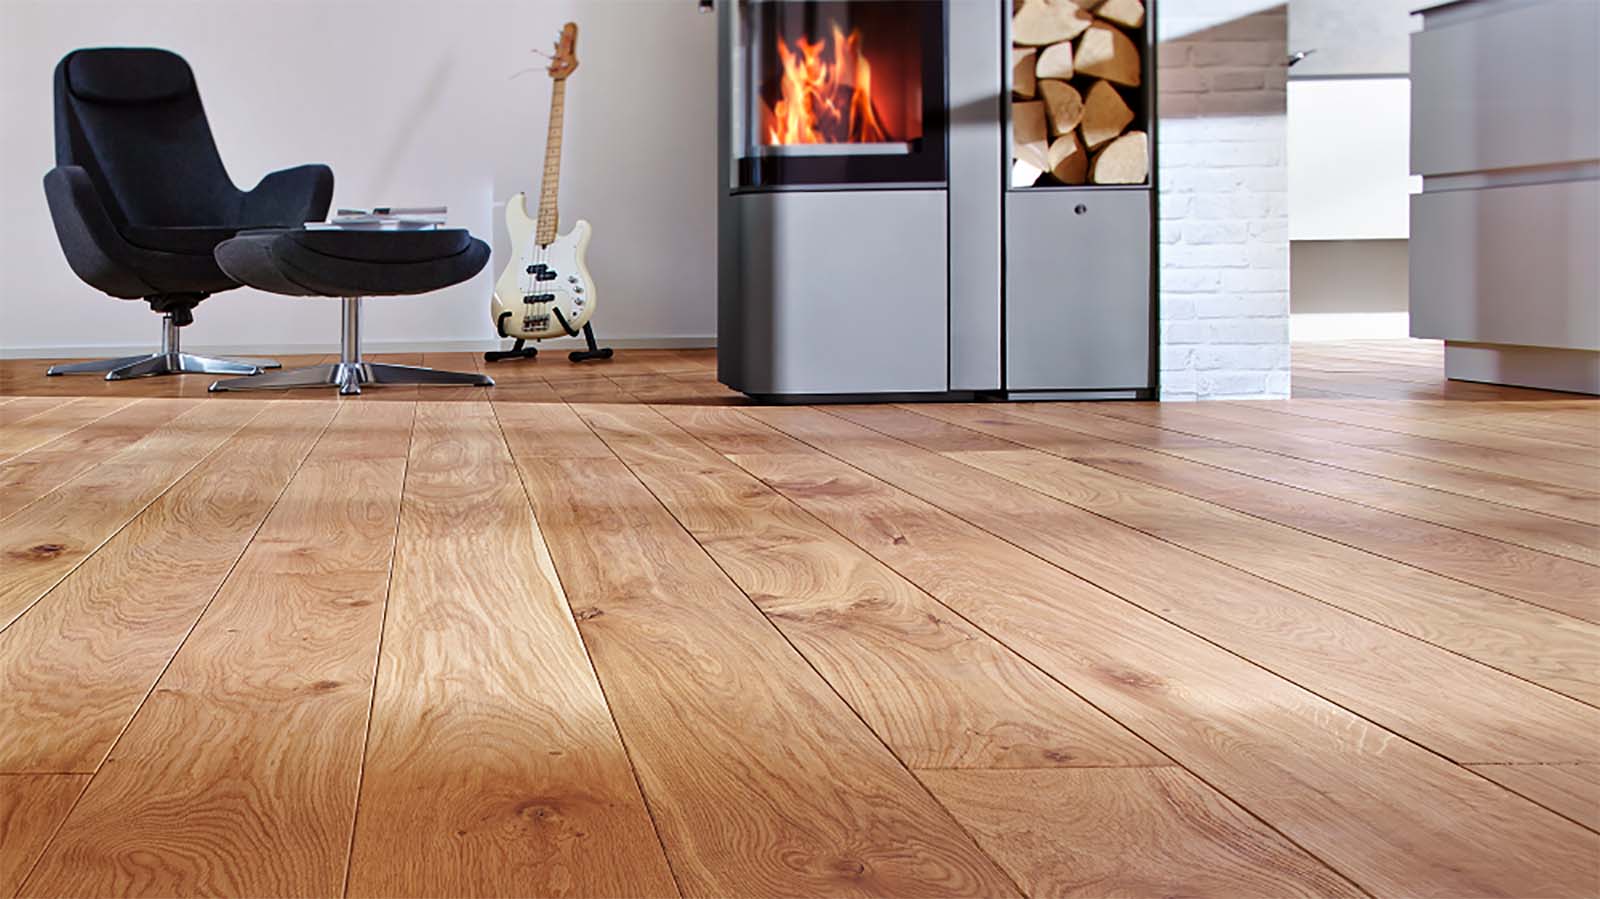 Hardwax Oil Protects And Seals Wood, Protect Hardwood Floors From Plants